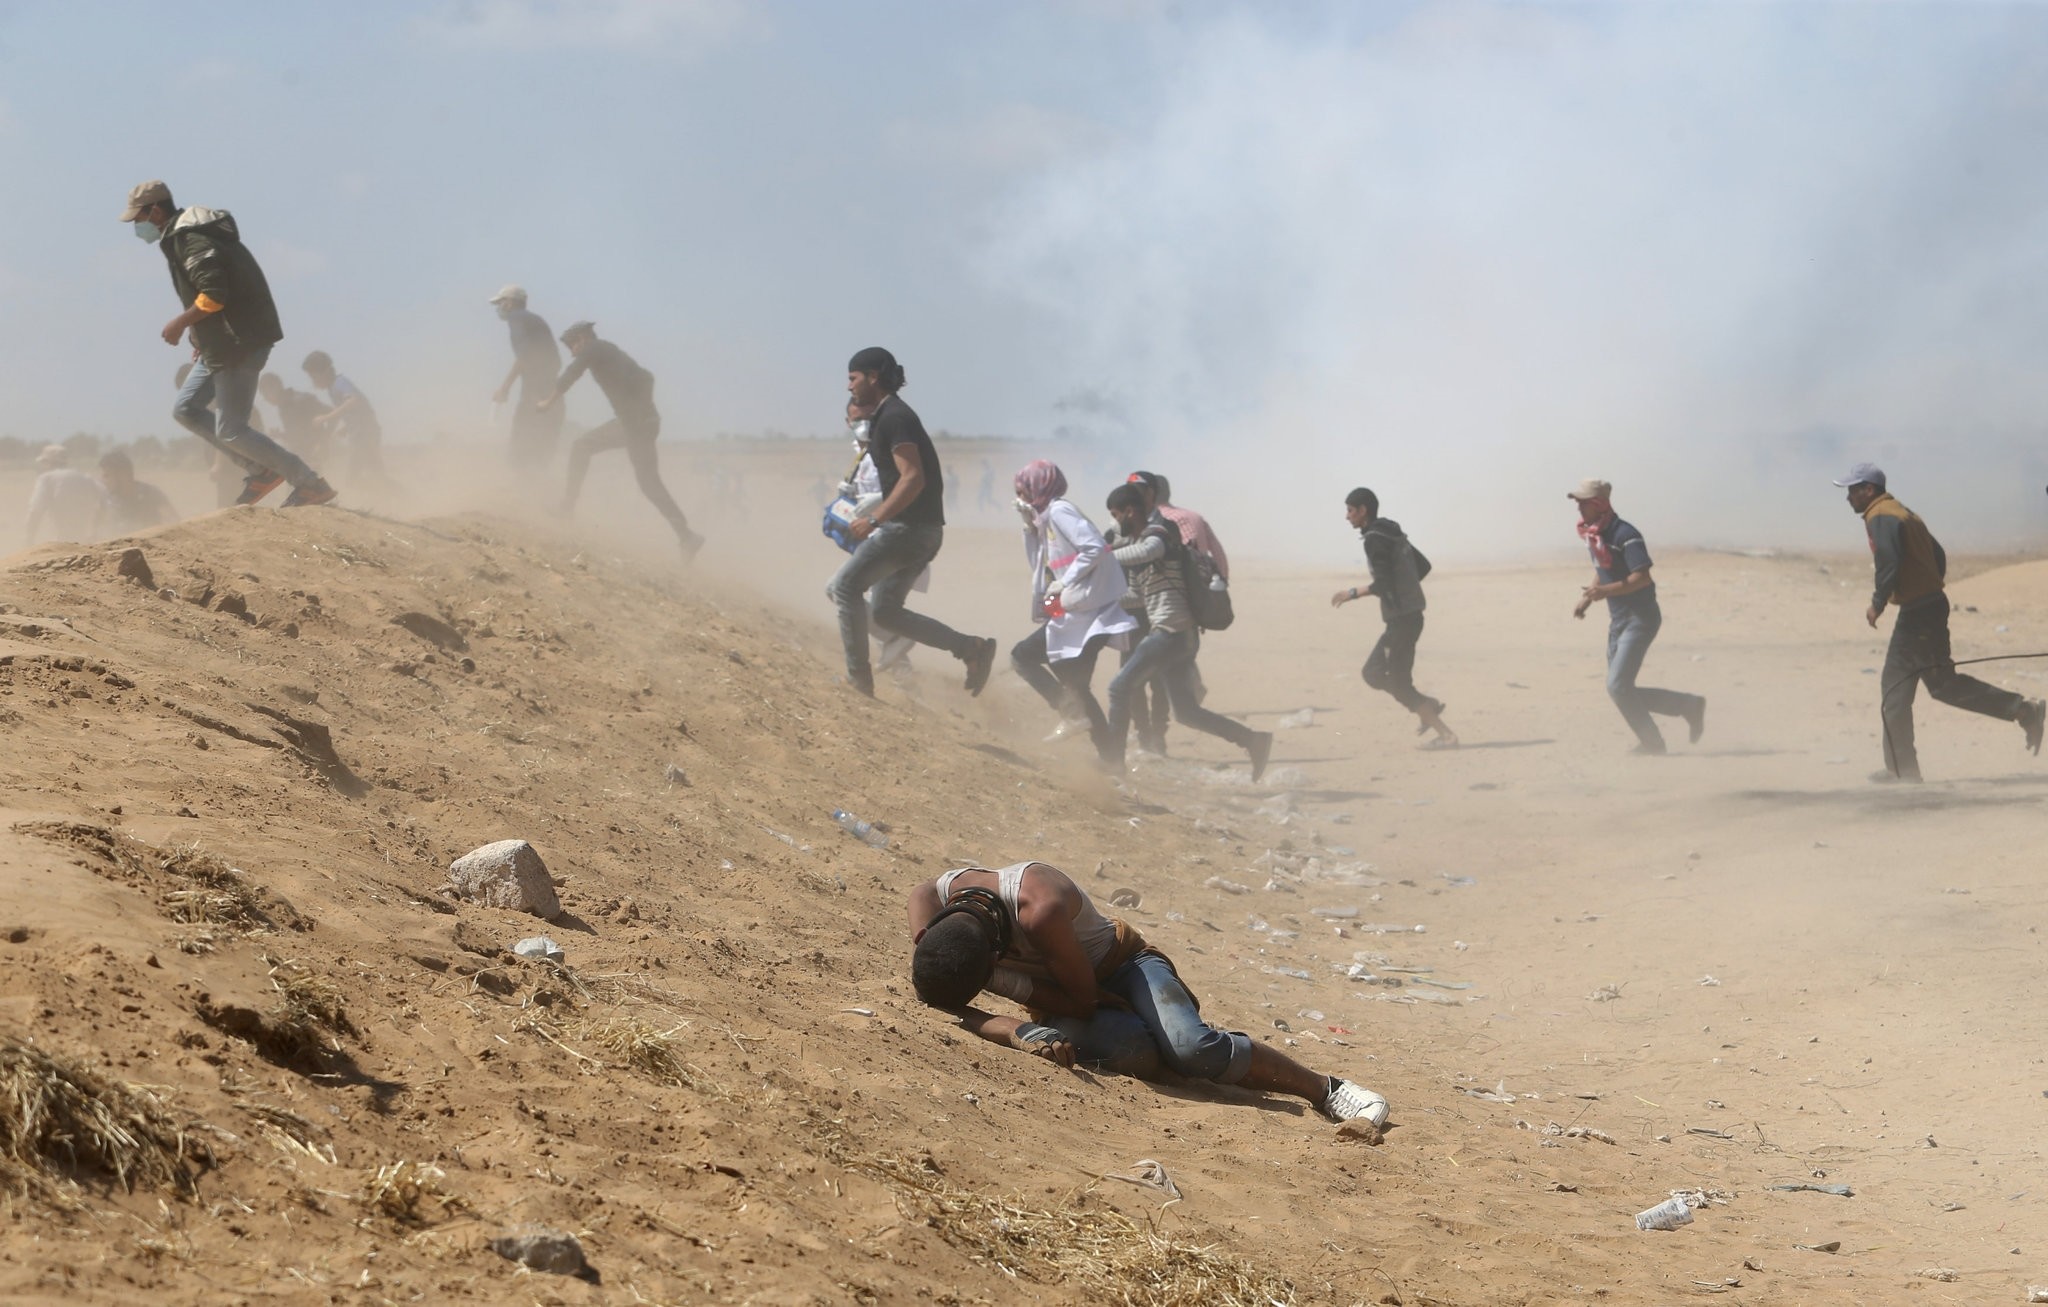 A Palestinian demonstrator reacts as others run from tear gas fired by Israeli forces during a protest marking the 70th anniversary of Nakba, at the Israel-Gaza border in the southern Gaza Strip yesterday.